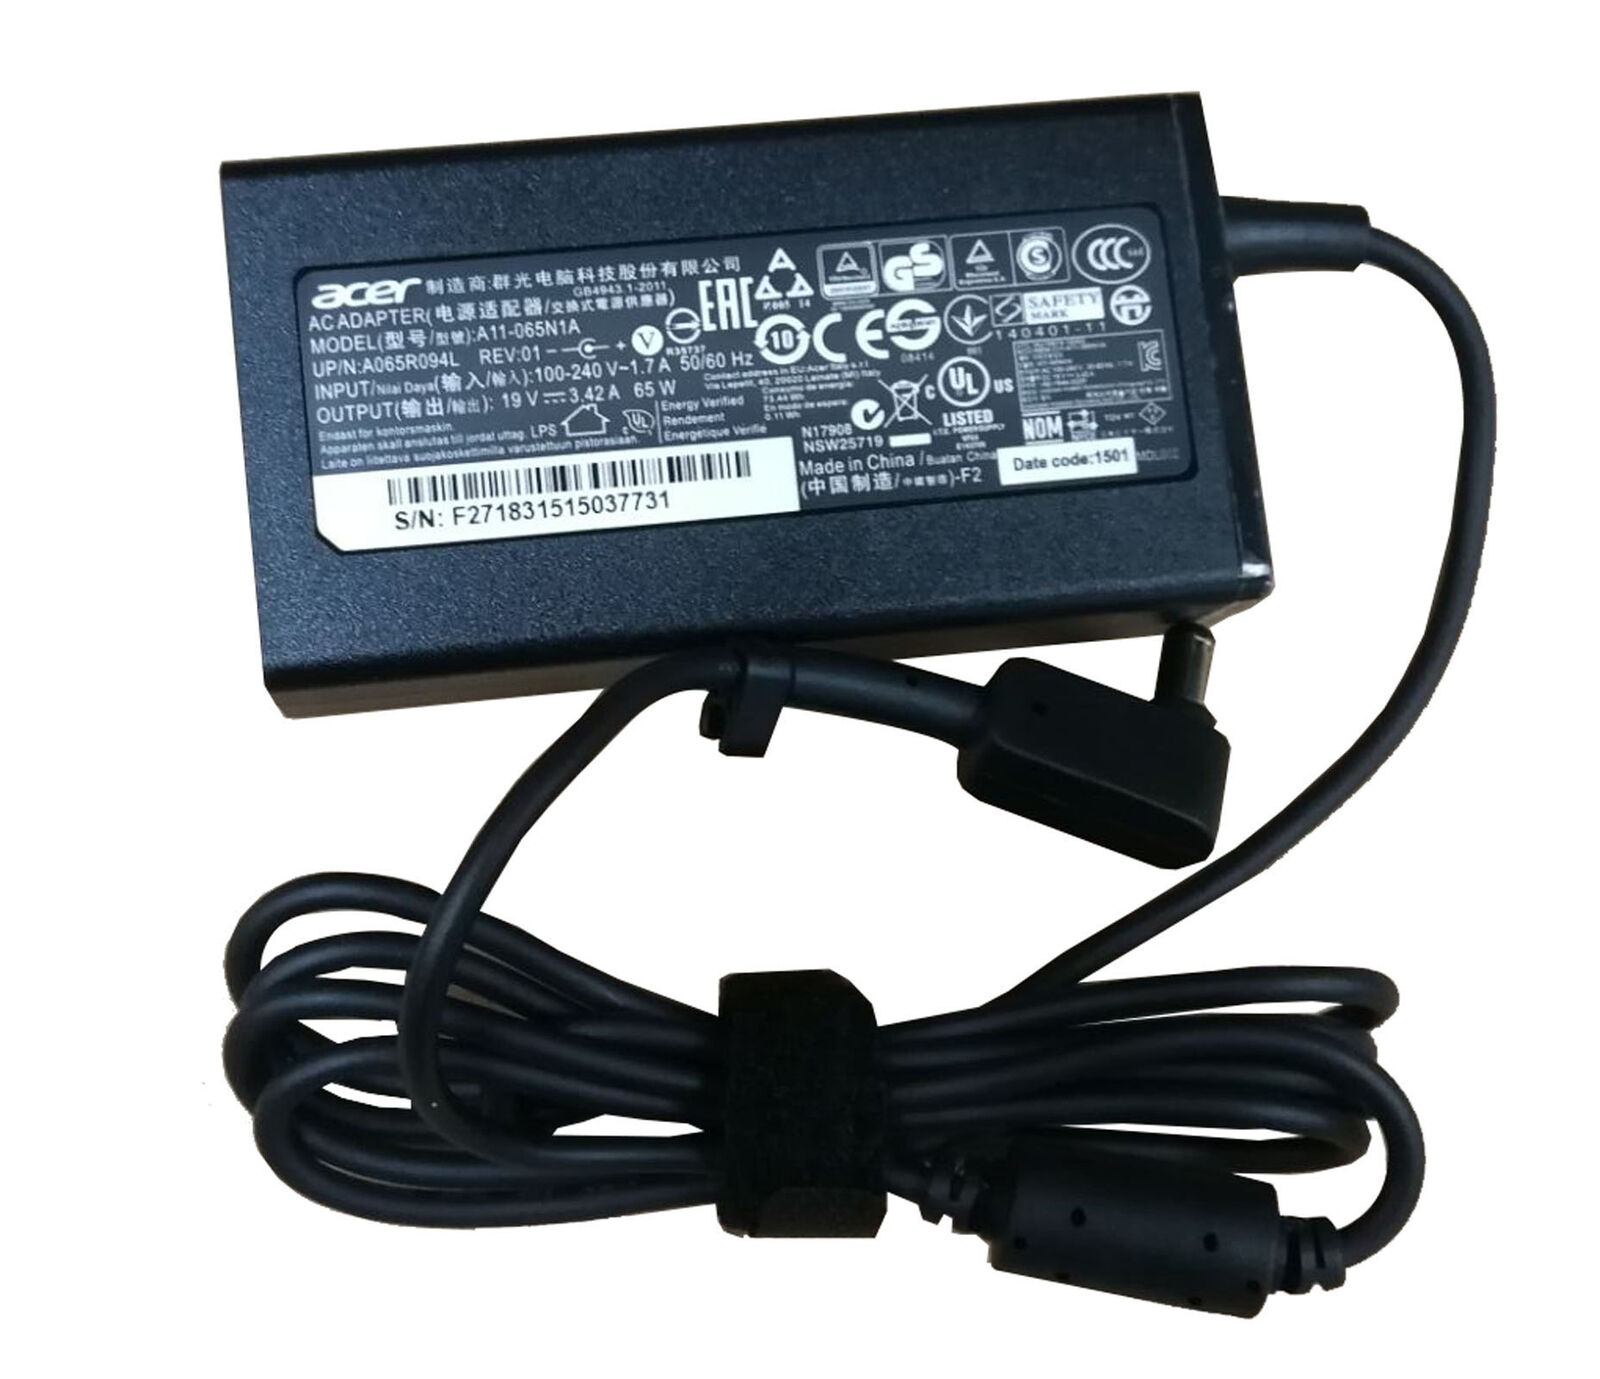 65W Acer Chromebook CB5-311-T9B0 Charger AC Adapter Power Cord